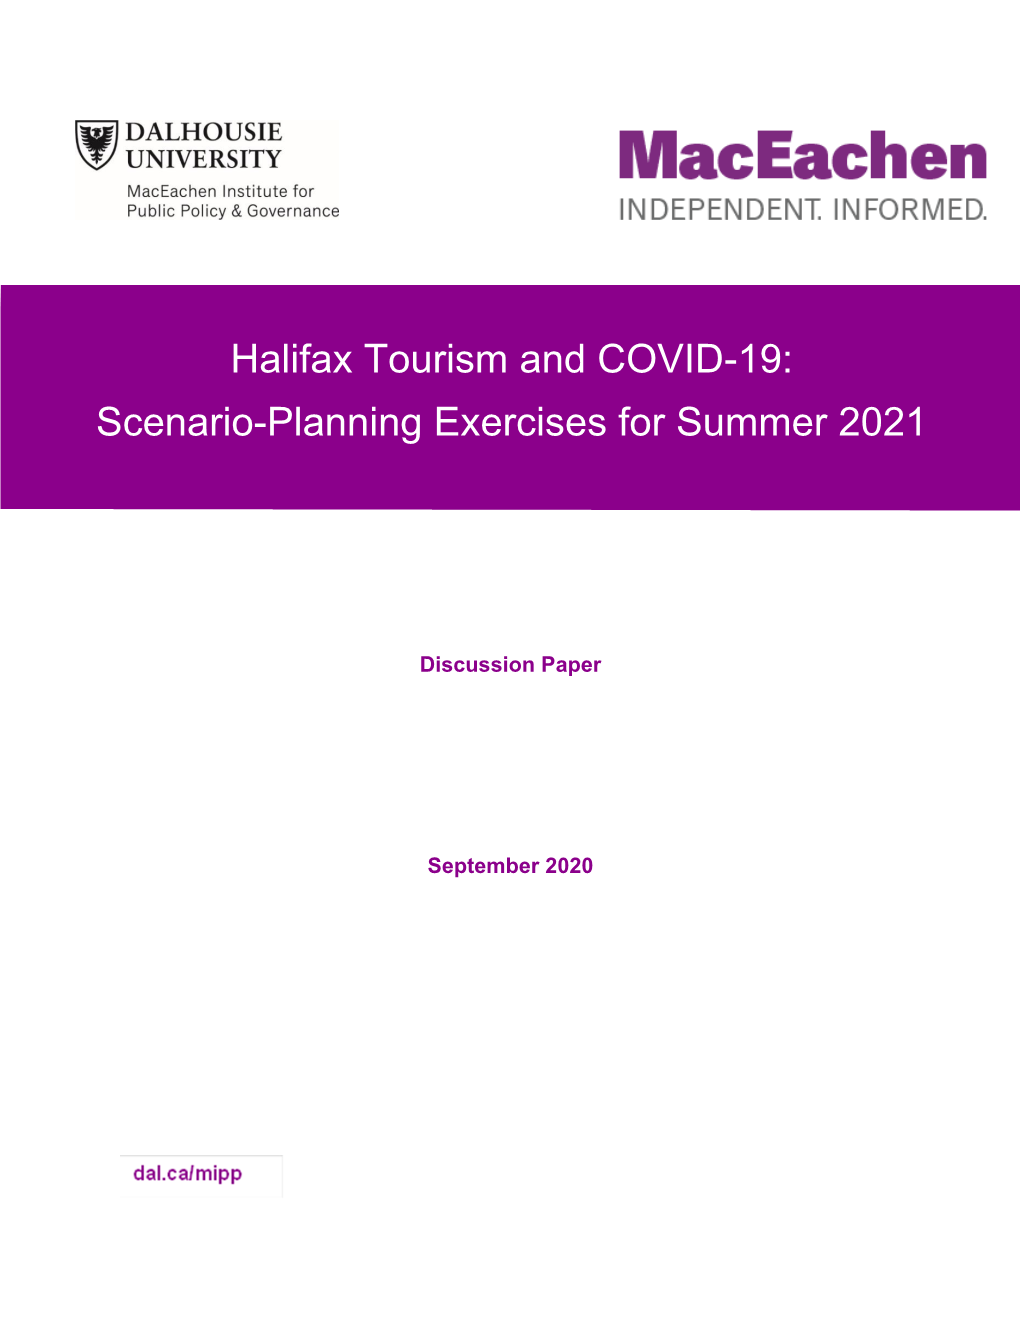 Halifax Tourism and COVID-19: Scenario-Planning Exercises for Summer 2021